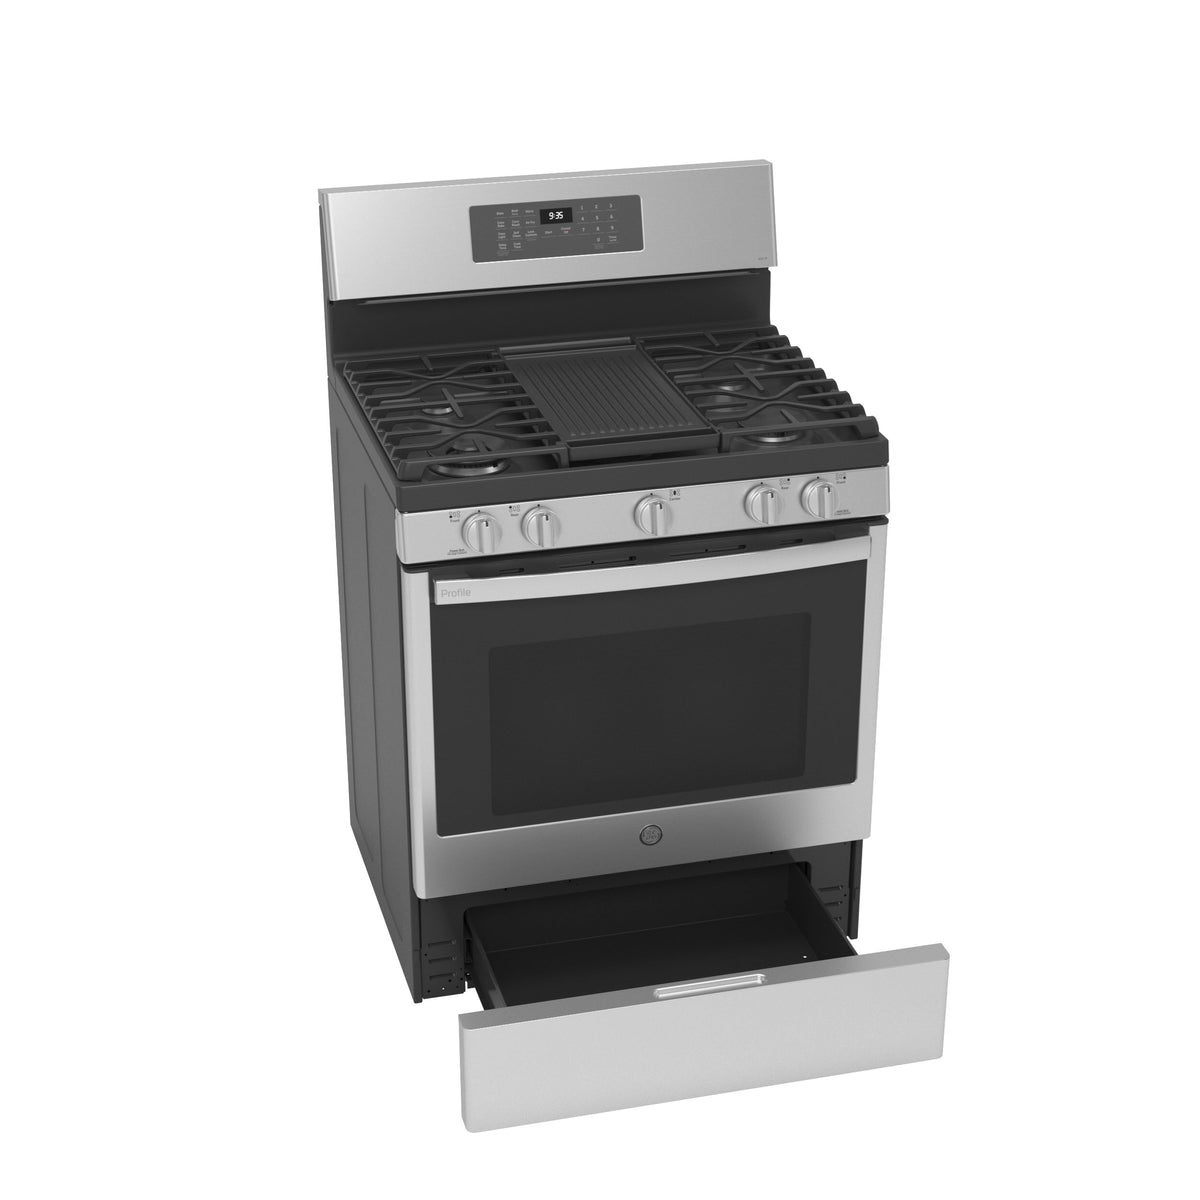 https://www.geaprstore.shop/wp-content/uploads/1690/17/shop-for-the-latest-fashions-of-ge-profile-30-free-standing-self-clean-dual-fuel-fingerprint-resistant-range-with-storage-drawer-ge-appliances-pr-online-store_5.jpg